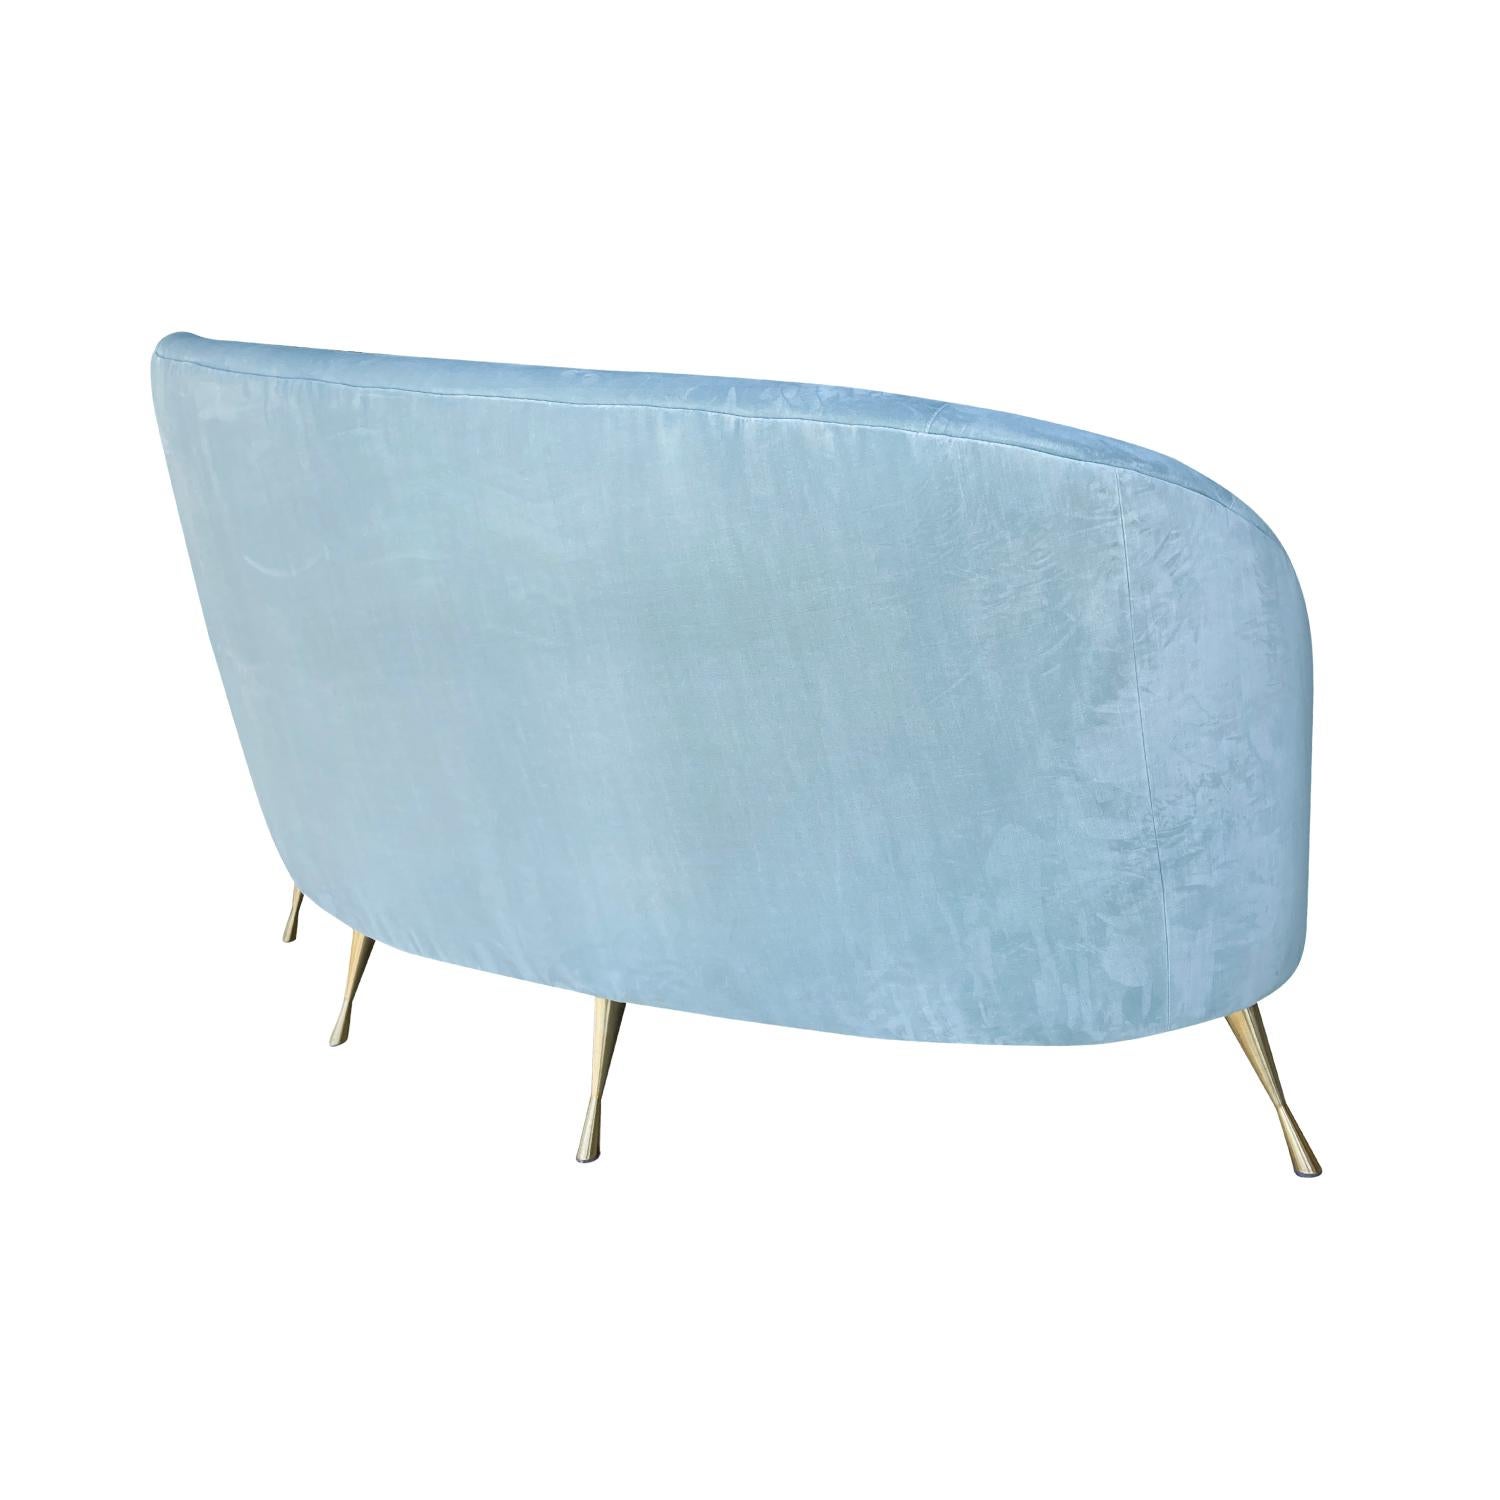 Hand-Carved 20th Century Light-Blue Italian Curved Four Seater Sofa by Federico Munari